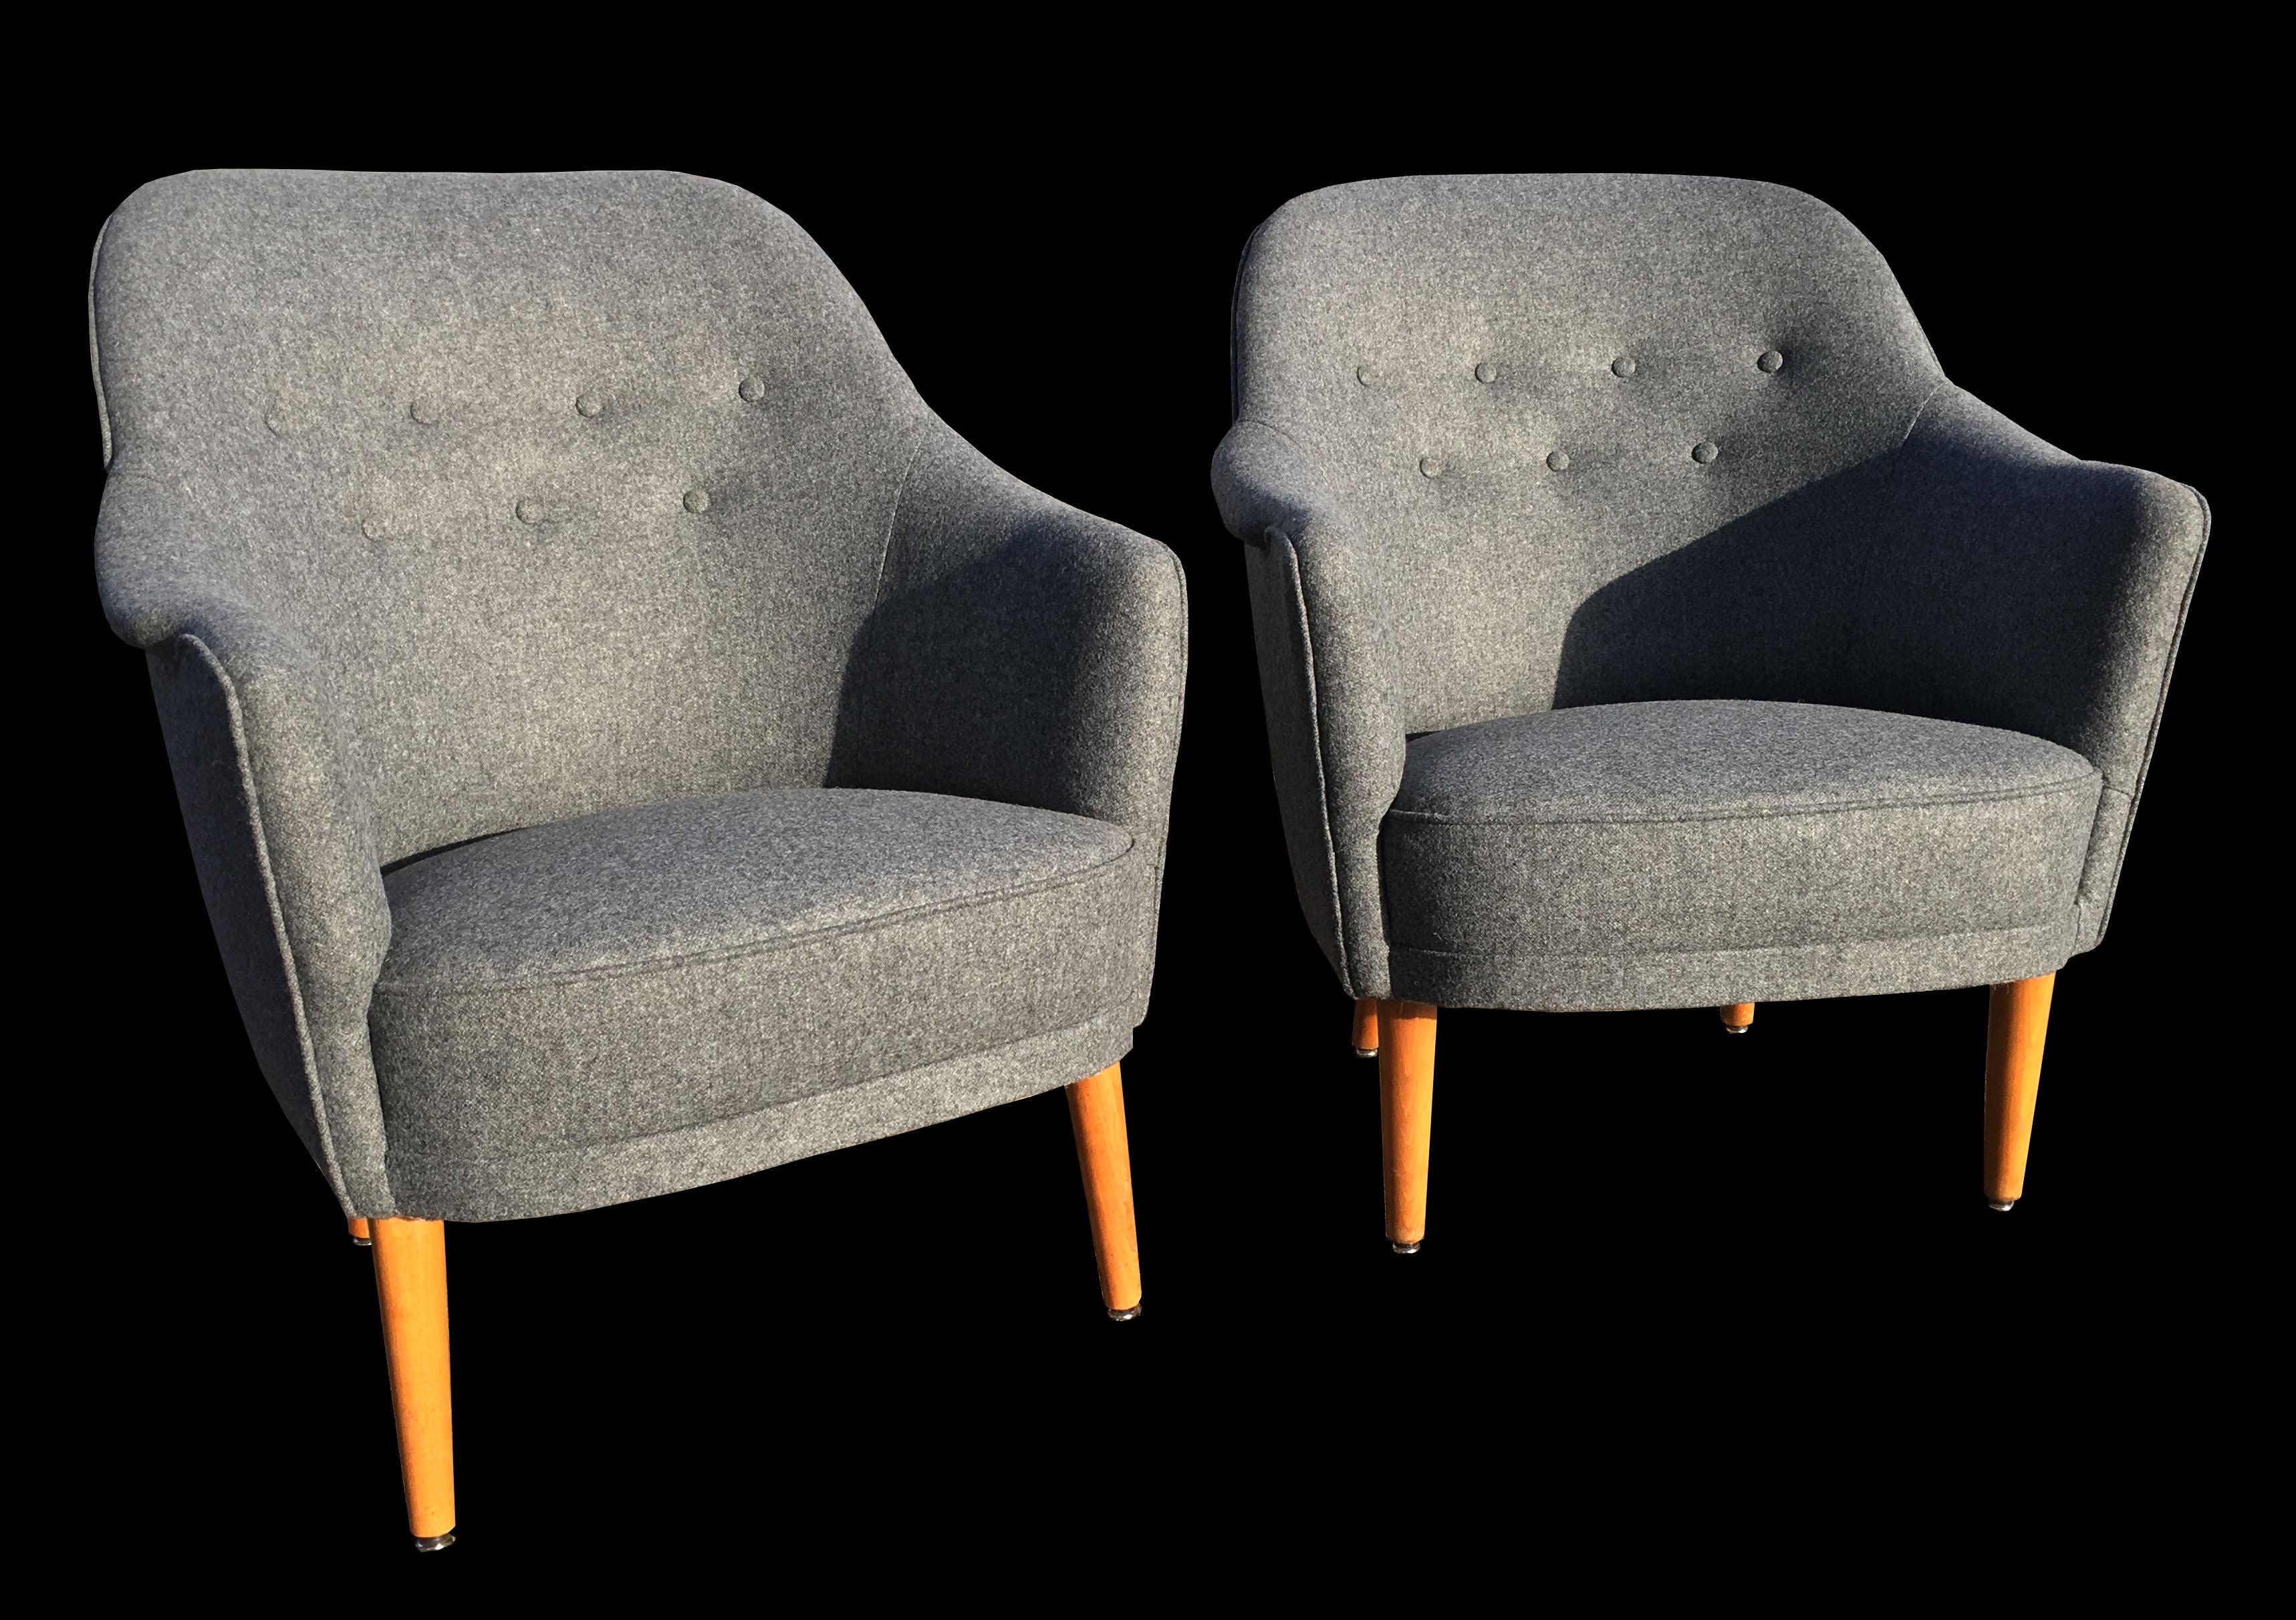 An immaculate fully restored pair of Samas arm/Lounge chairs, completely reupholstered in quality grey woolen fabric. but keeping the original springs, hence super comfortable as well as super cool!
This pair of chairs are a match for the two and